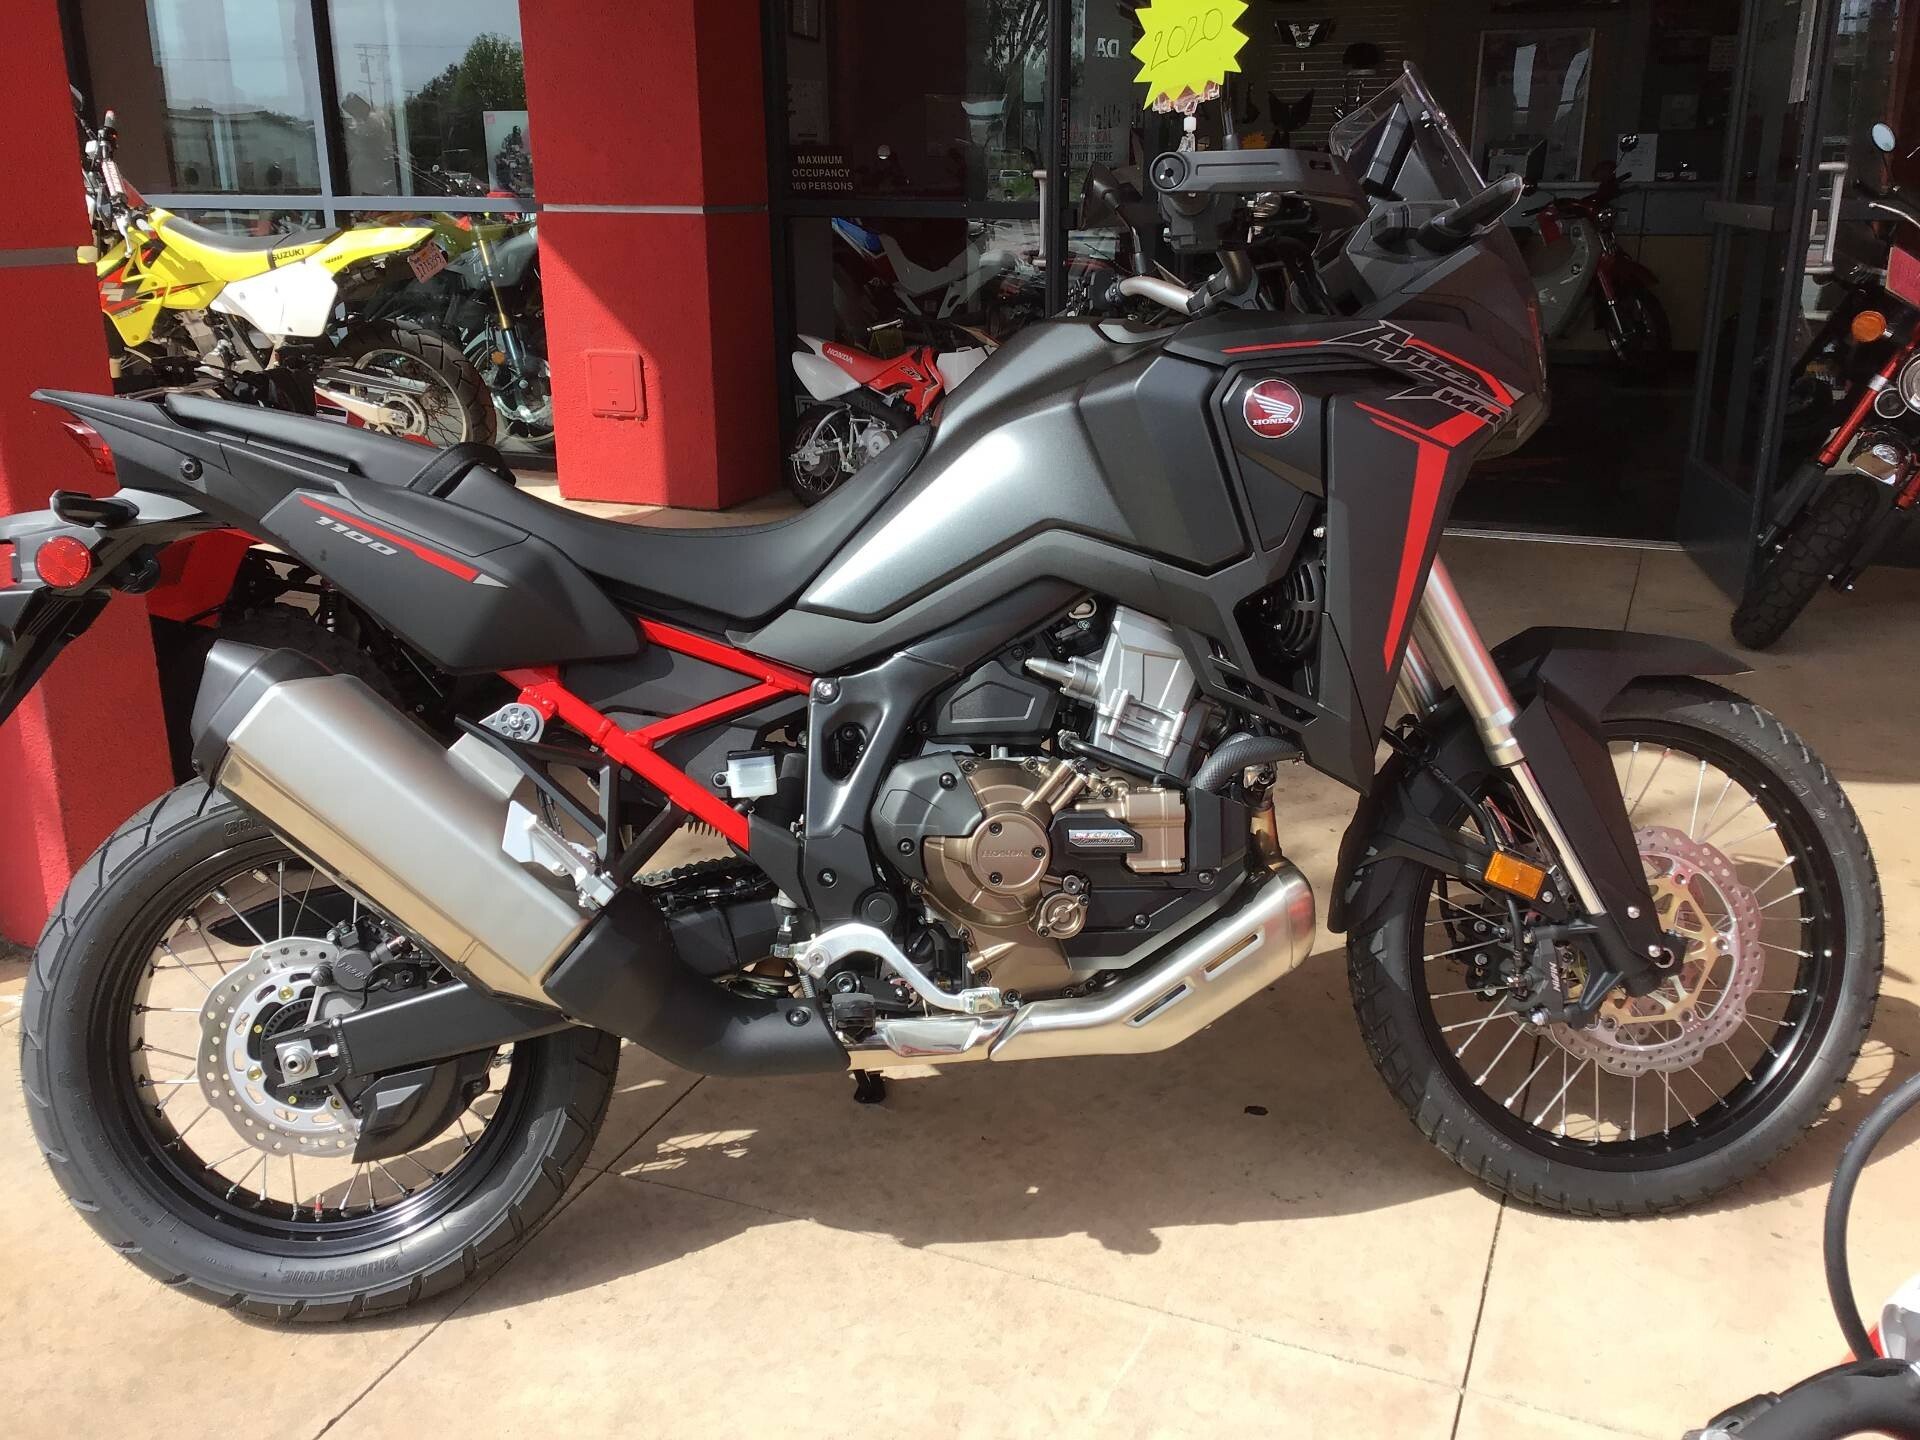 Honda Africa Twin Dct For Sale Near Huntington Beach California Motorcycles On Autotrader